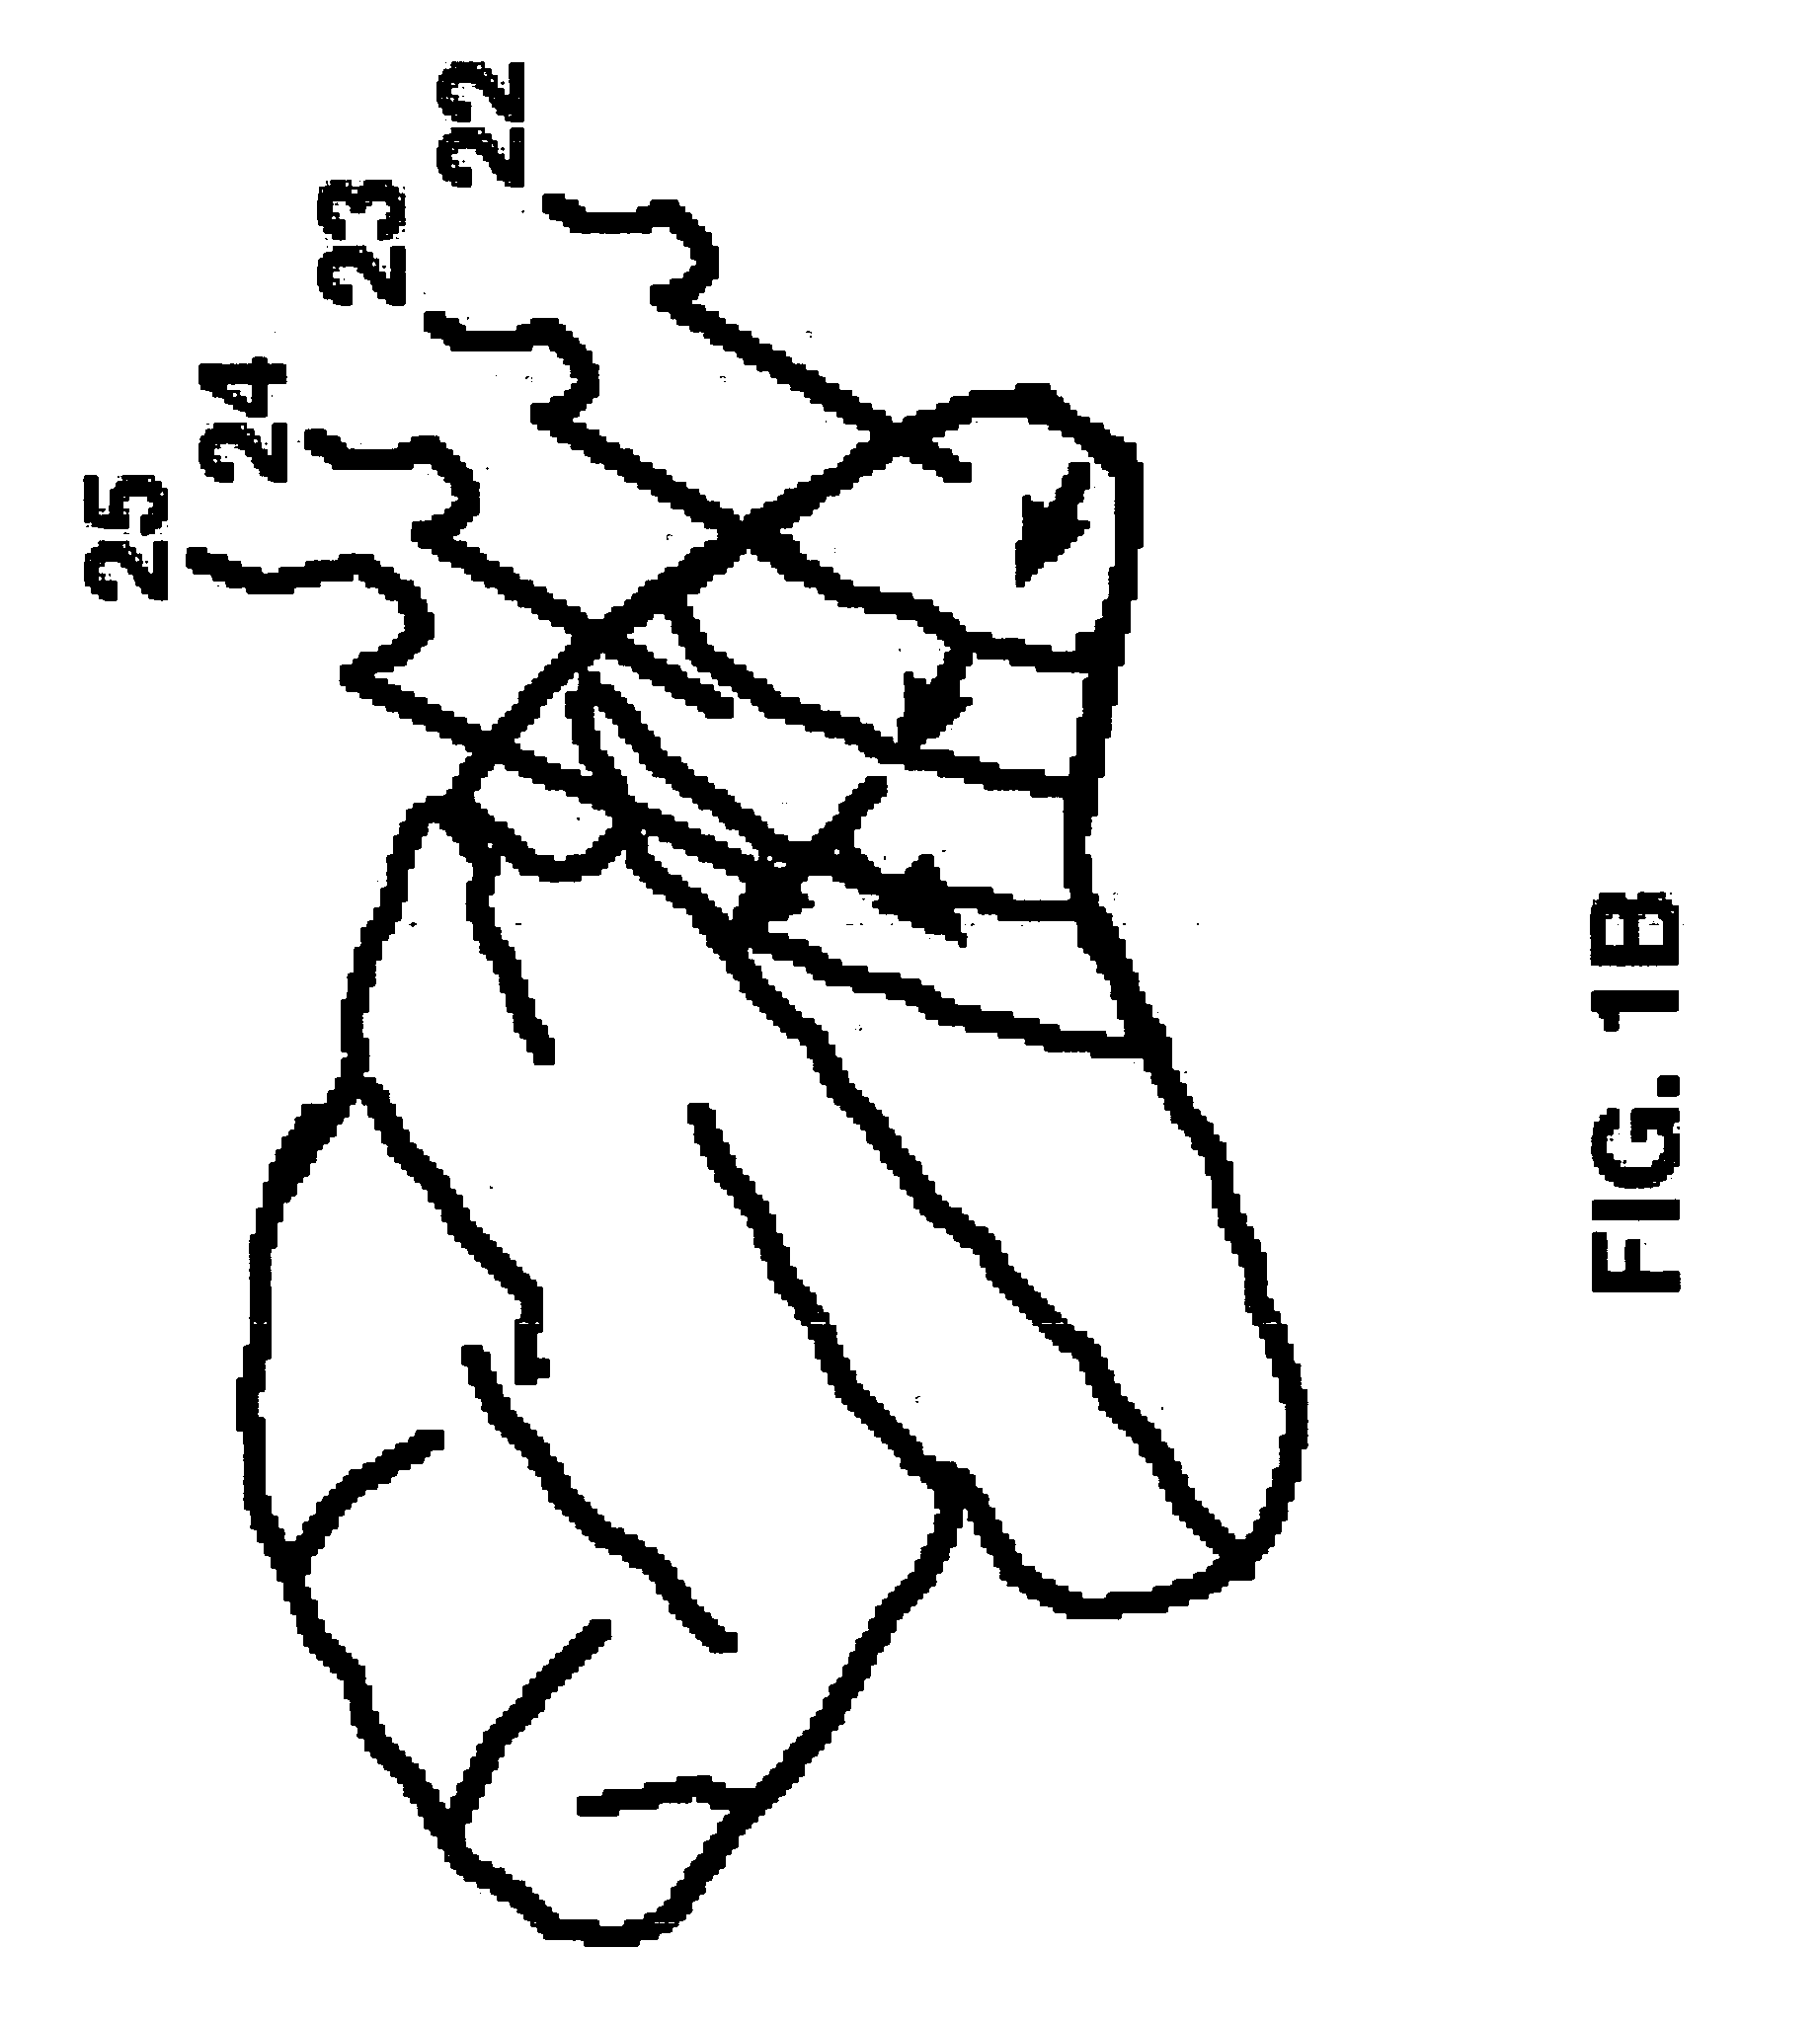 Method for assessment of color processing mechanism in the human brain for diagnosis and treatment